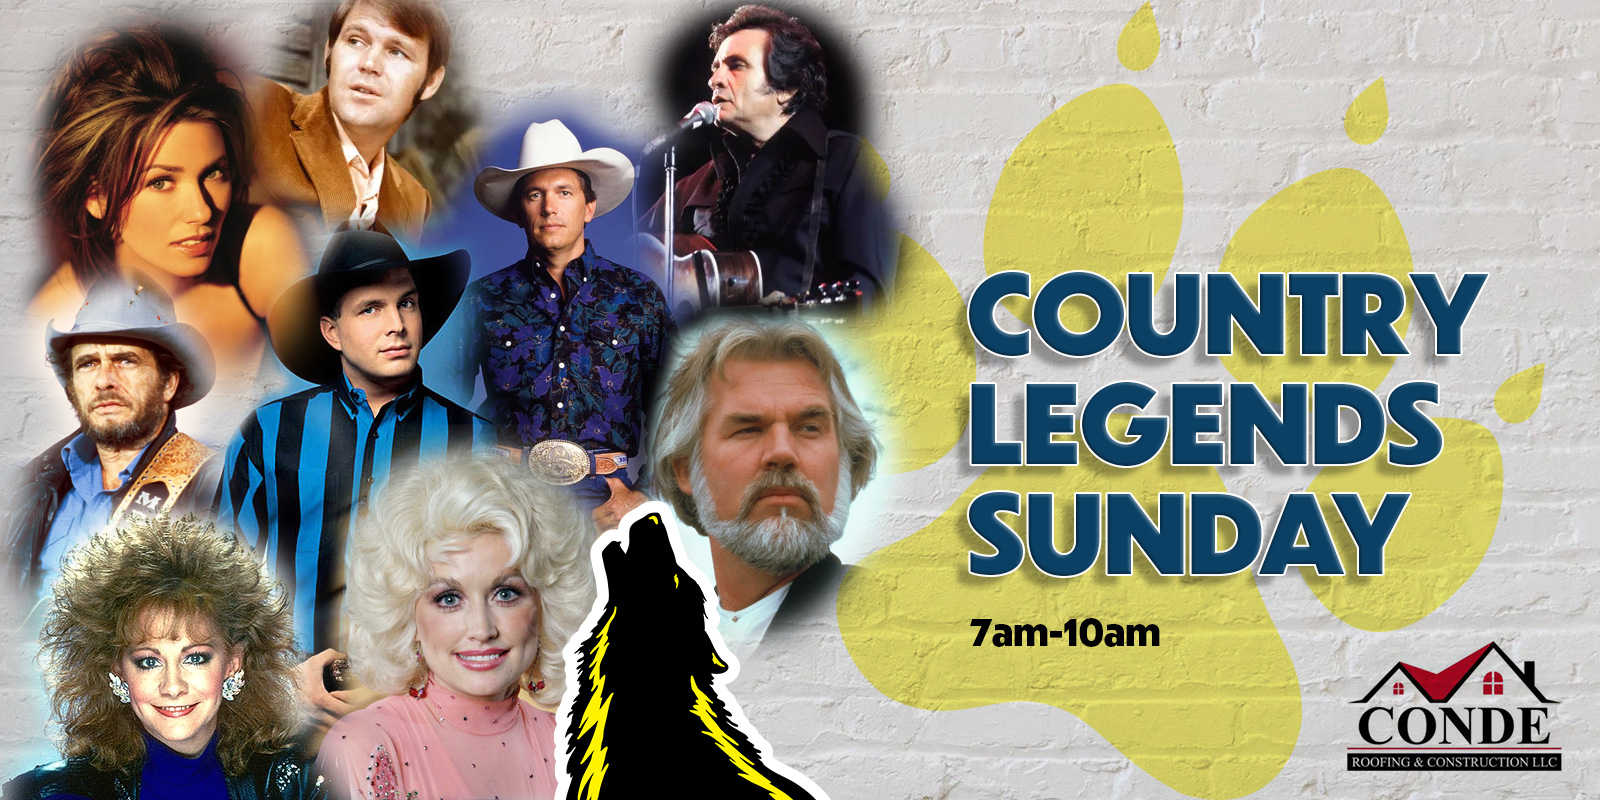 Country Legends Sunday: A Tribute to Timeless Country Music